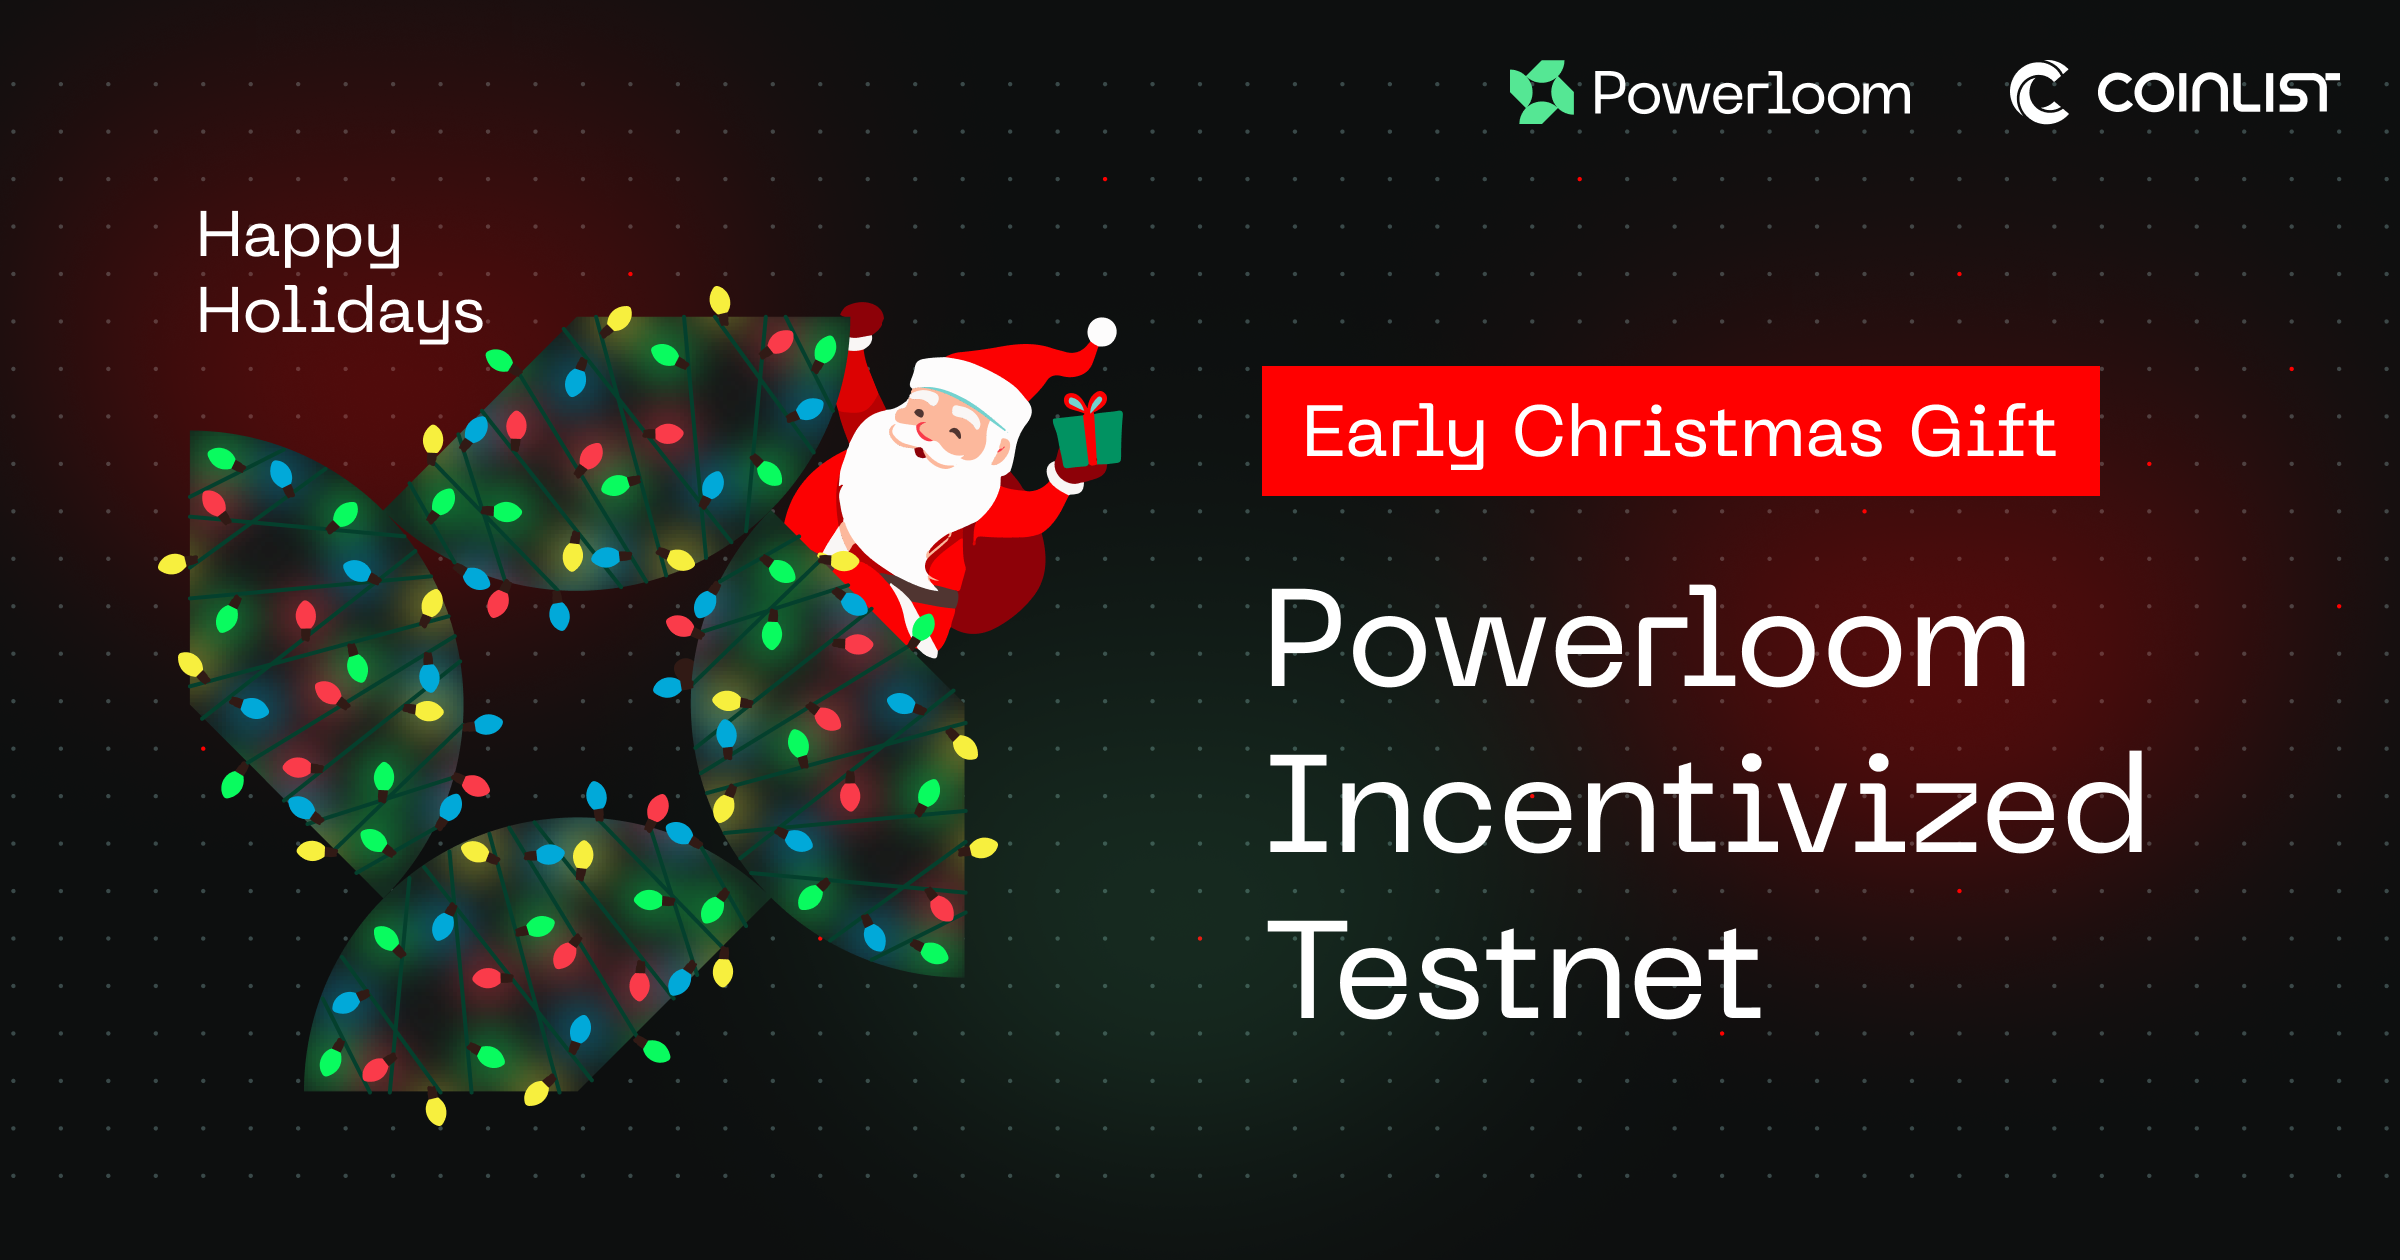 Celebrate the Holidays with Powerloom: Your Golden Ticket to our Incentivized Testnet!